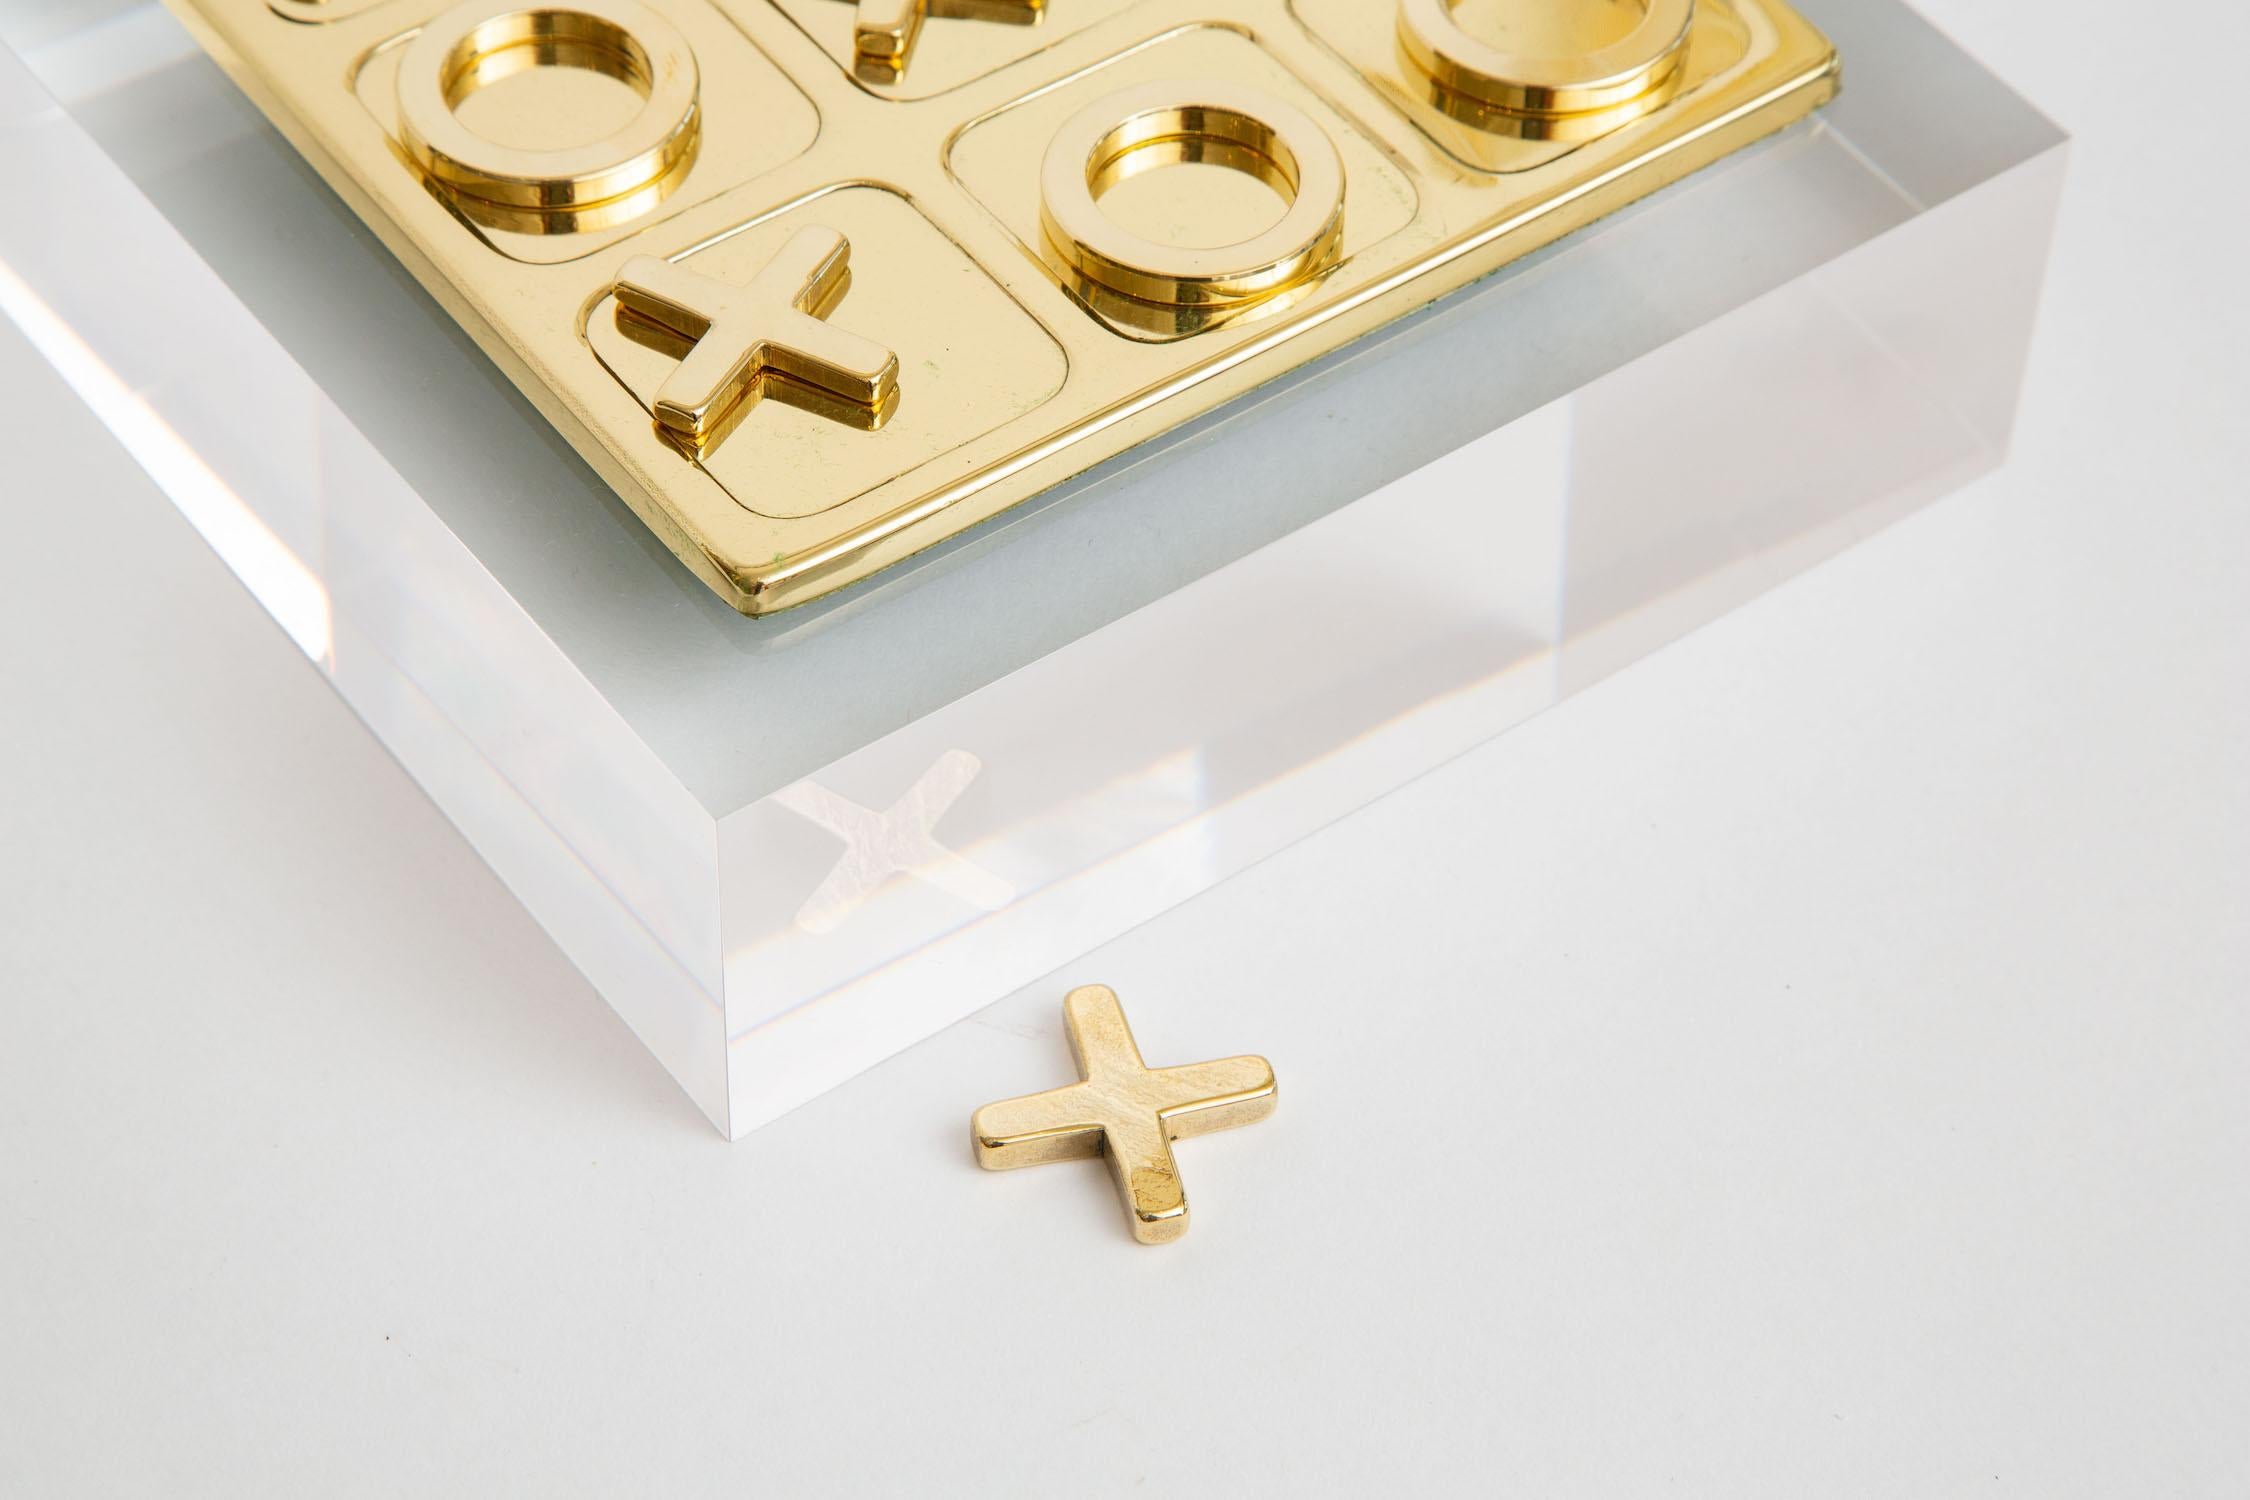  Vintage Brass Tic Tac Toe Set Game on Custom Lucite Base In Good Condition For Sale In North Miami, FL